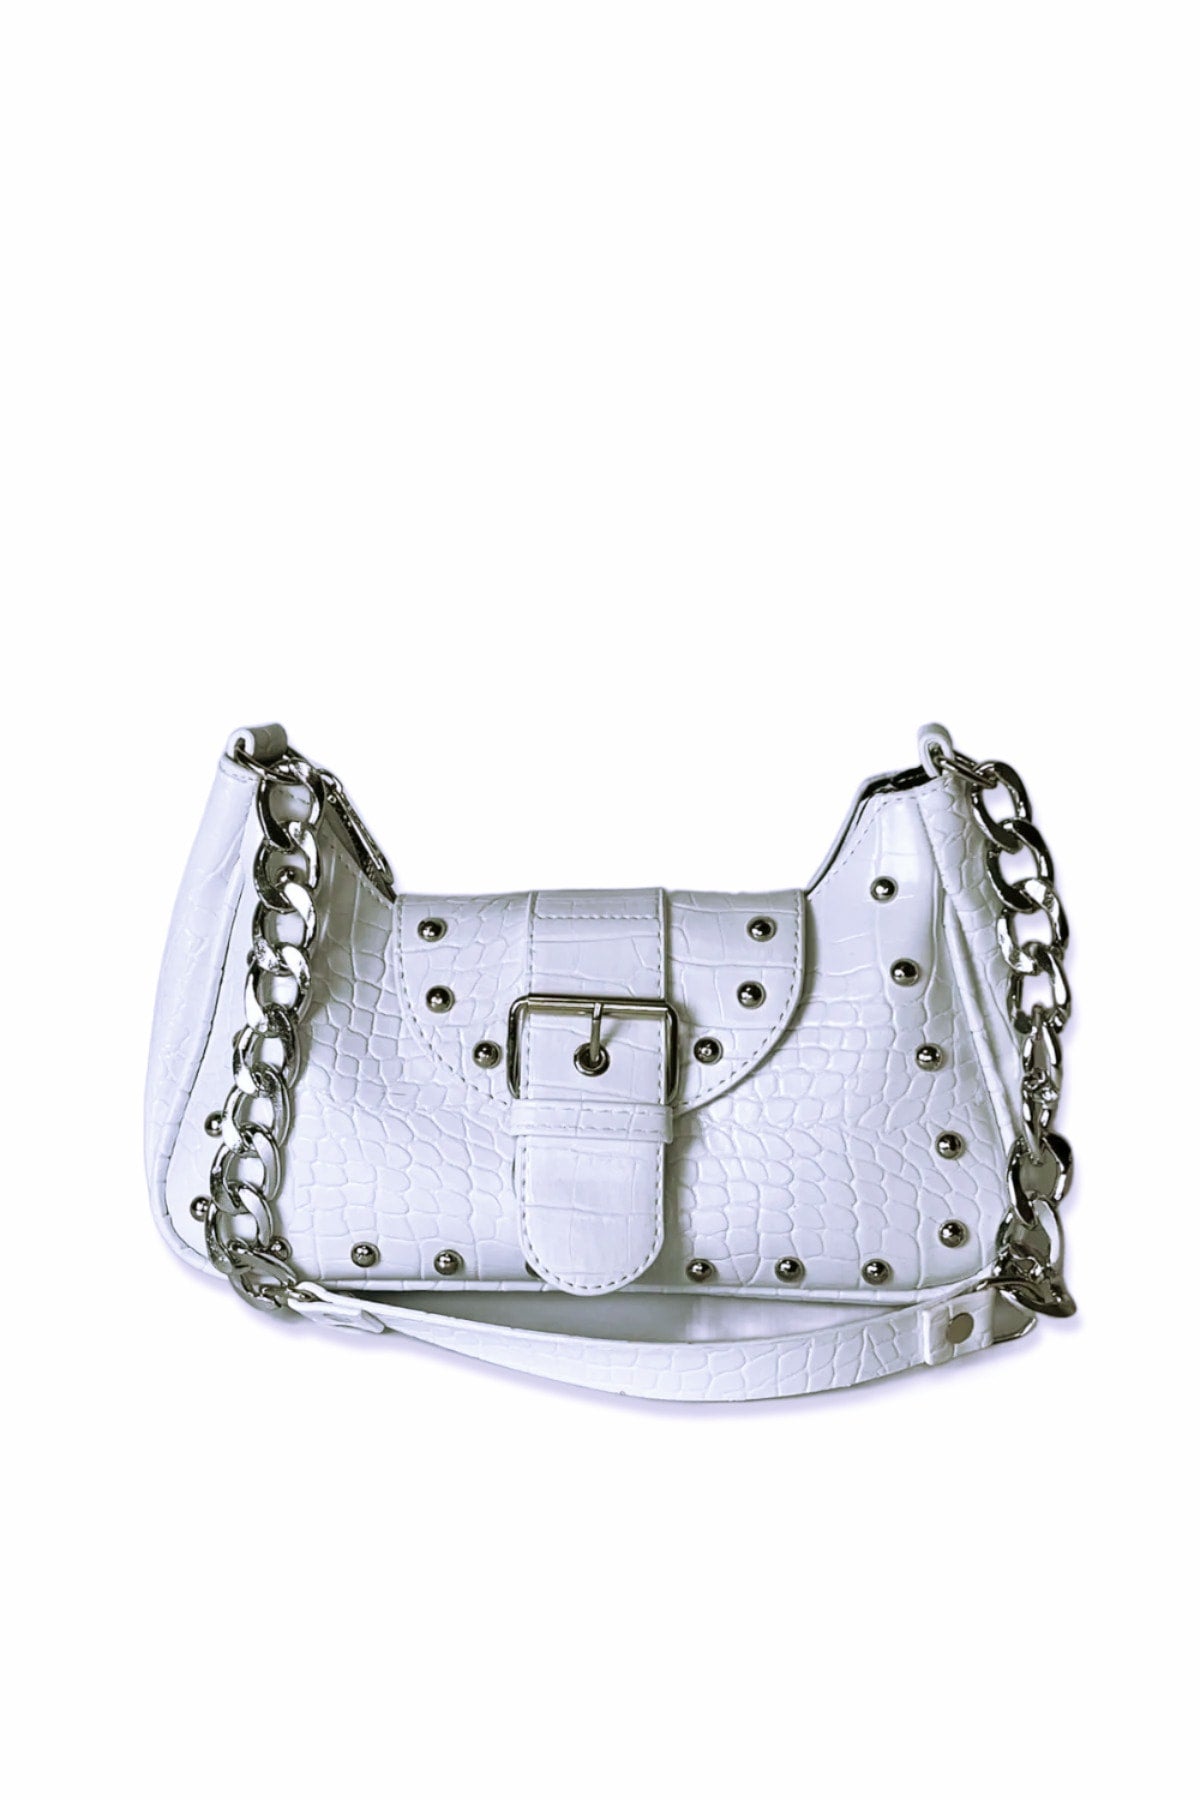 Crocodile Patterned White Handle Bag with Bony Staples